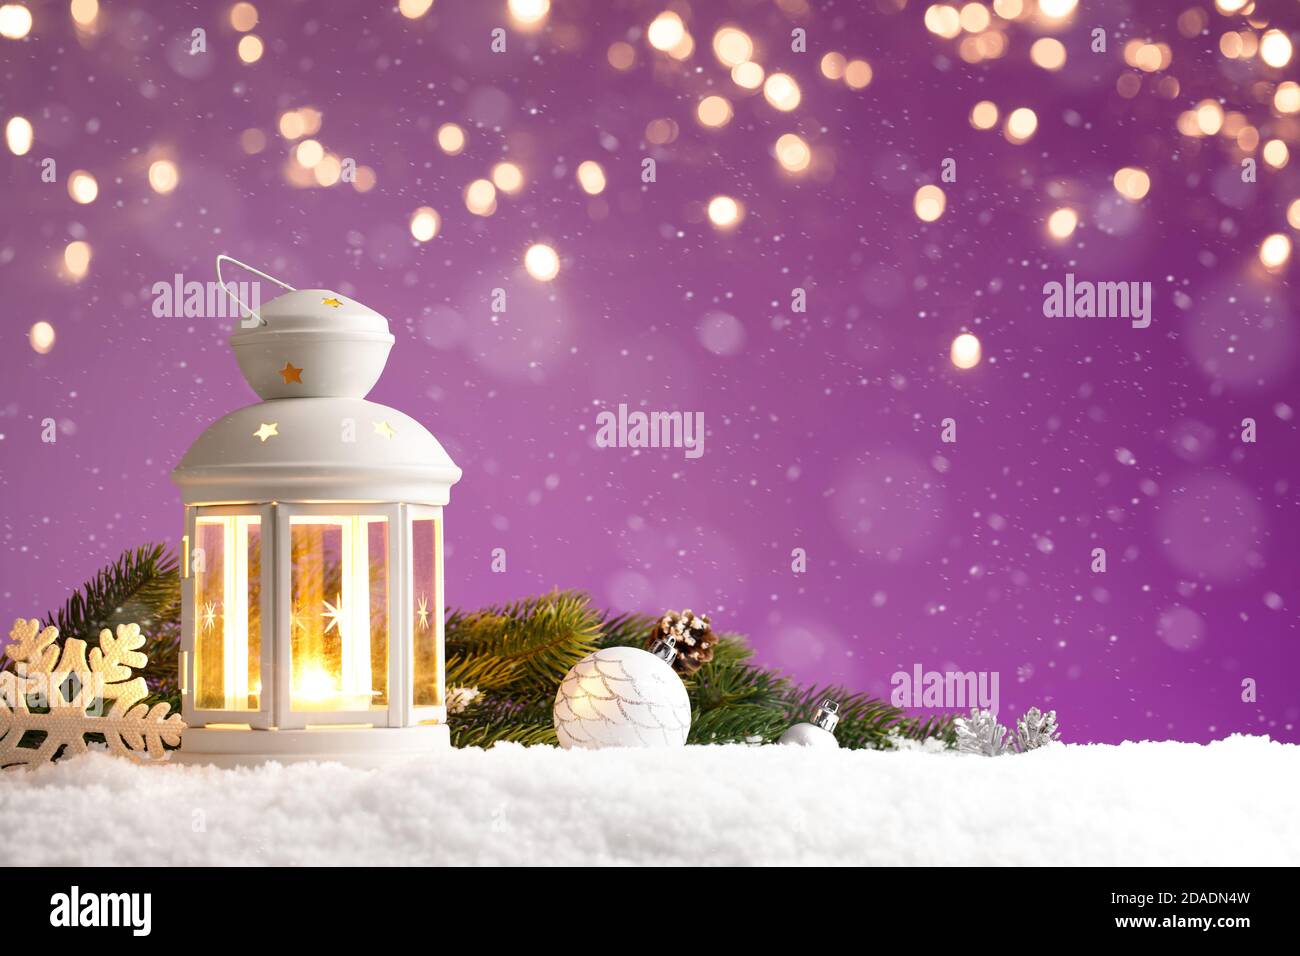 Christmas lantern with decorations on purple background with golden lights Stock Photo